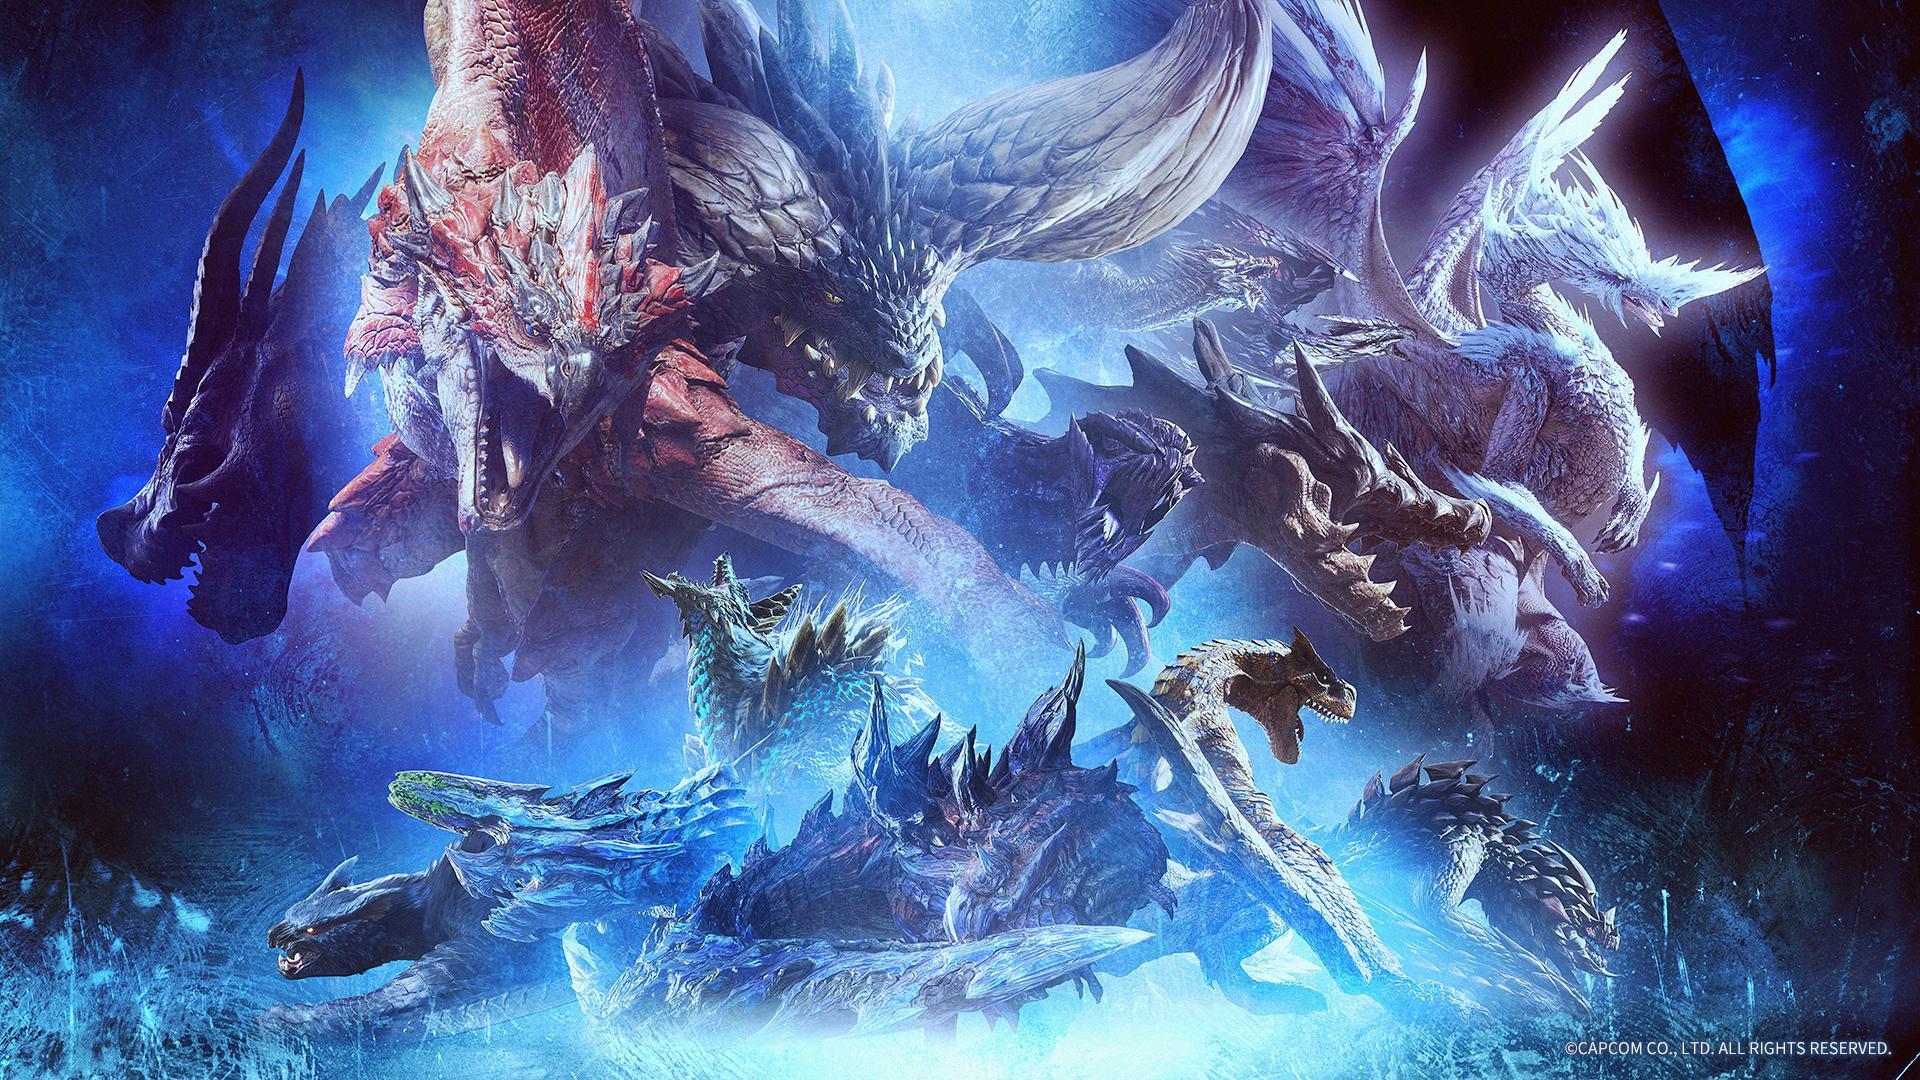 Monster Hunter wallpapers for desktop download free Monster Hunter  pictures and backgrounds for PC  moborg